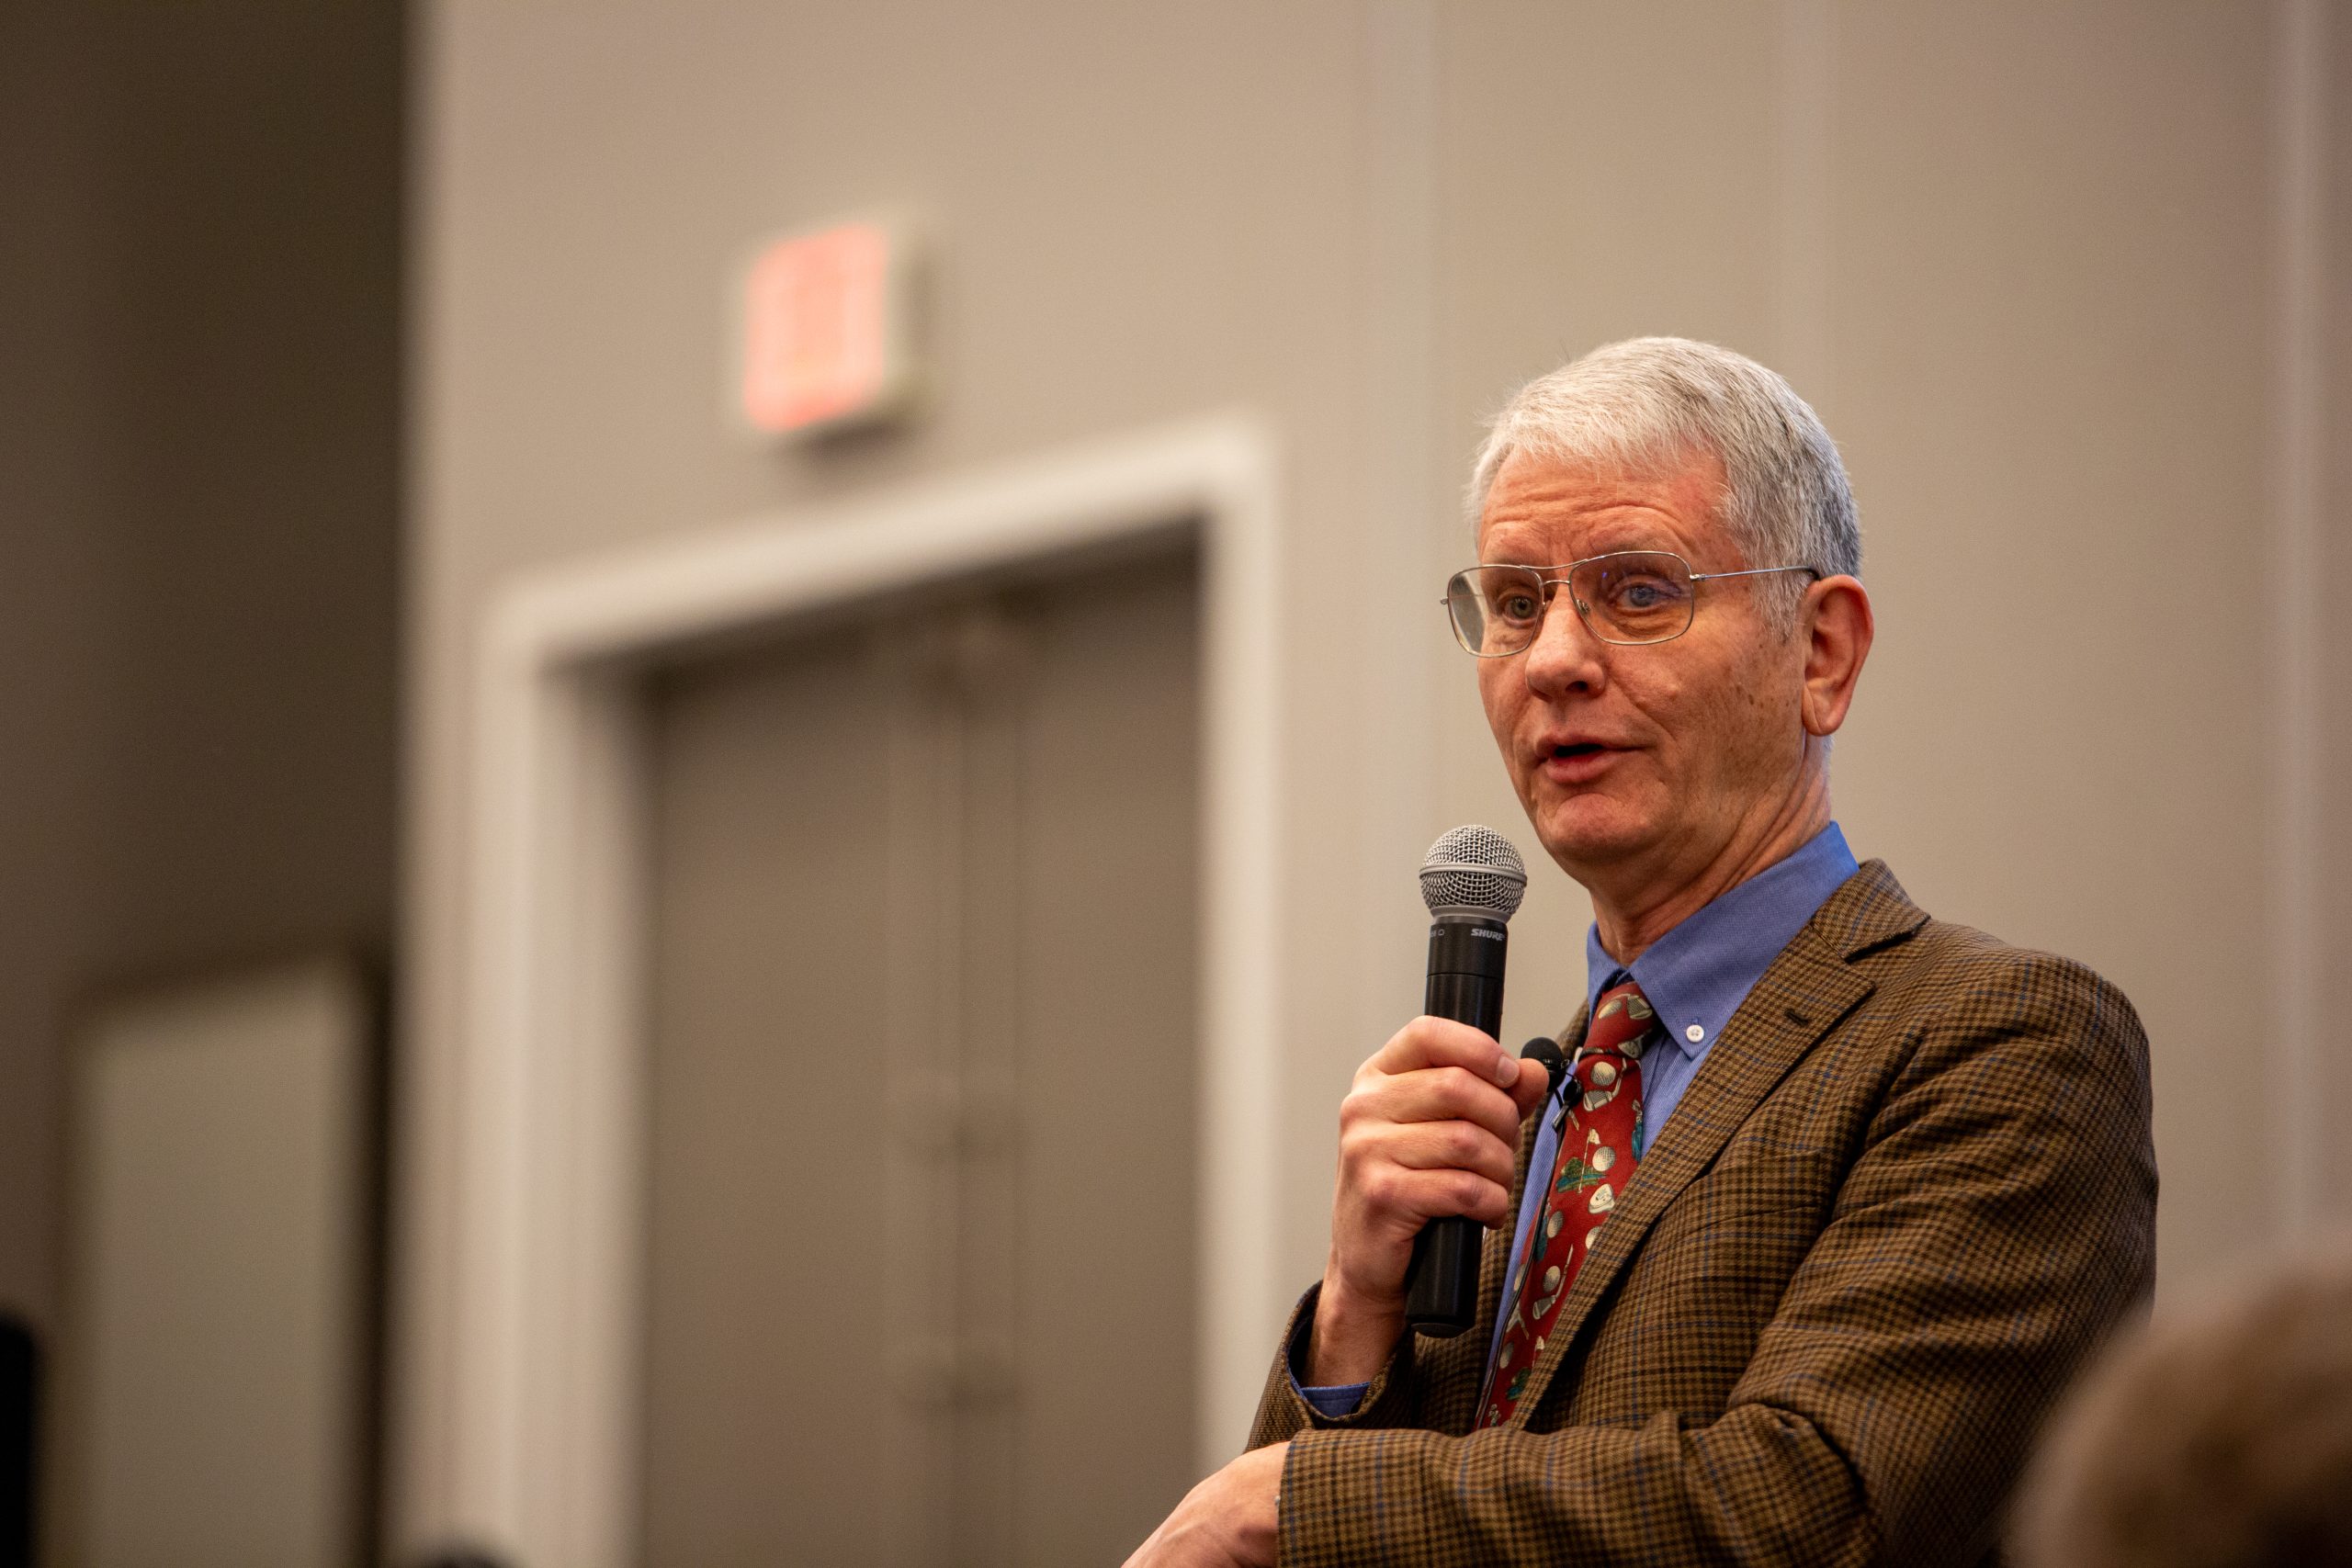 Jim Mintert, professor at Purdue University in the Department of Agricultural Economics and director of the Center for Commercial Agriculture, spoke Jan. 26 at the Kansas Commodity Classic in Salina, Kansas. Mintert gave a domestic and global market update. (Journal photo by Kylene Scott.)